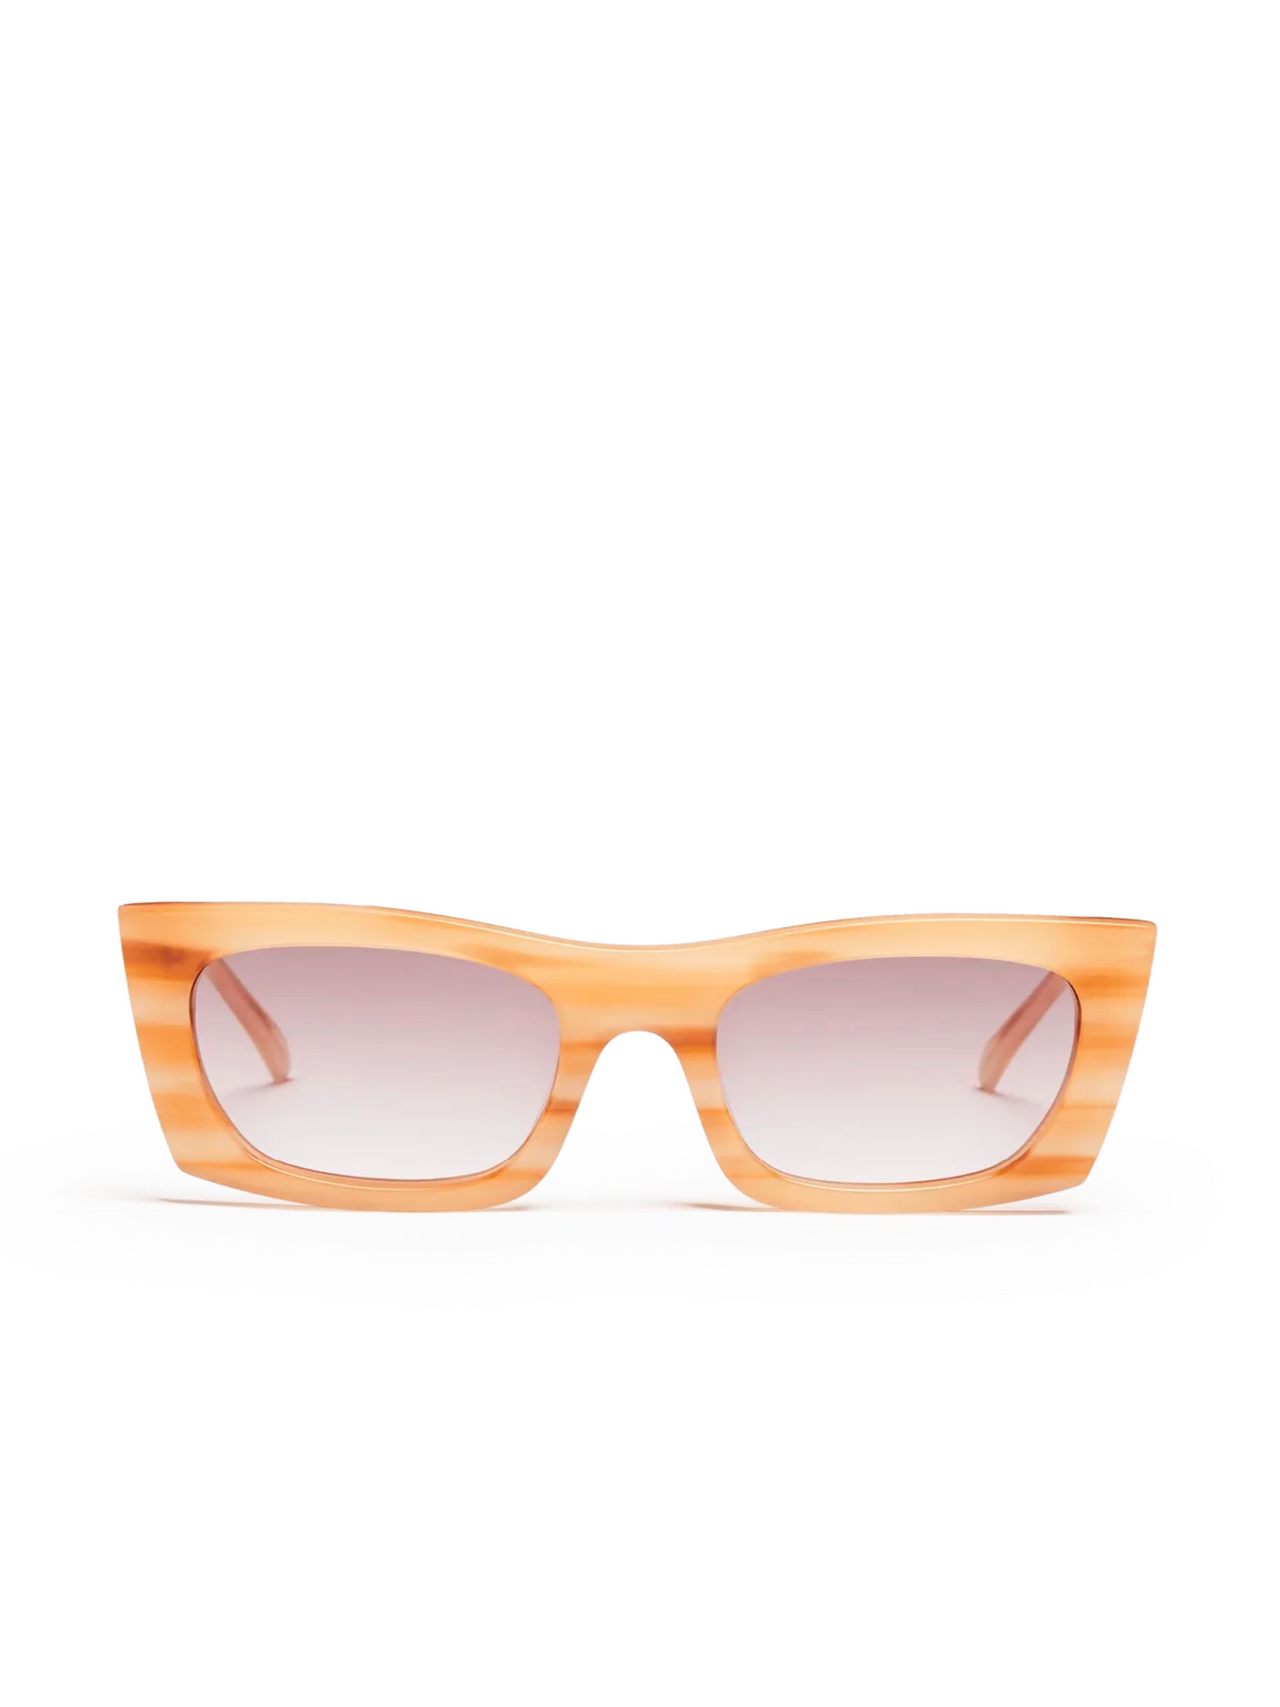 The Crawford Sunglasses Sand Tort/Oat Fade, Sunglass Acc by BANBE Eyewear | LIT Boutique